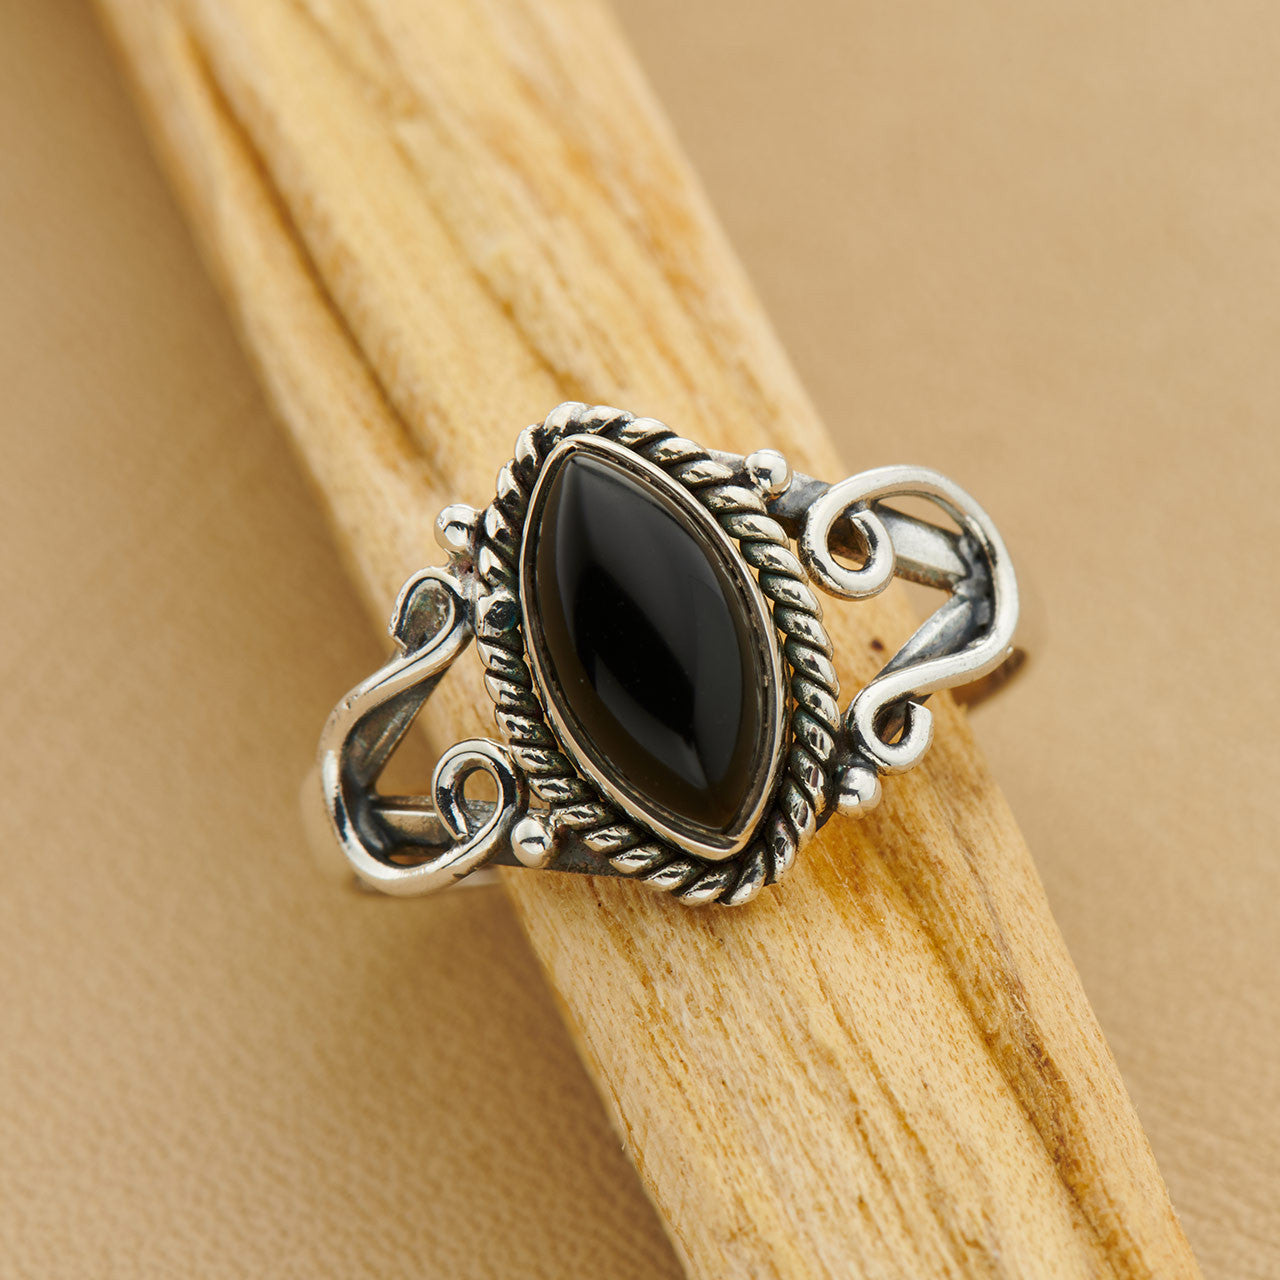 A powerful protection stone, Black Onyx absorbs and transforms negative energy, and helps to prevent the drain of personal energy. Black Onyx aids the development of emotional and physical strength and stamina, especially when support is needed during times of stress, confusion or grief.